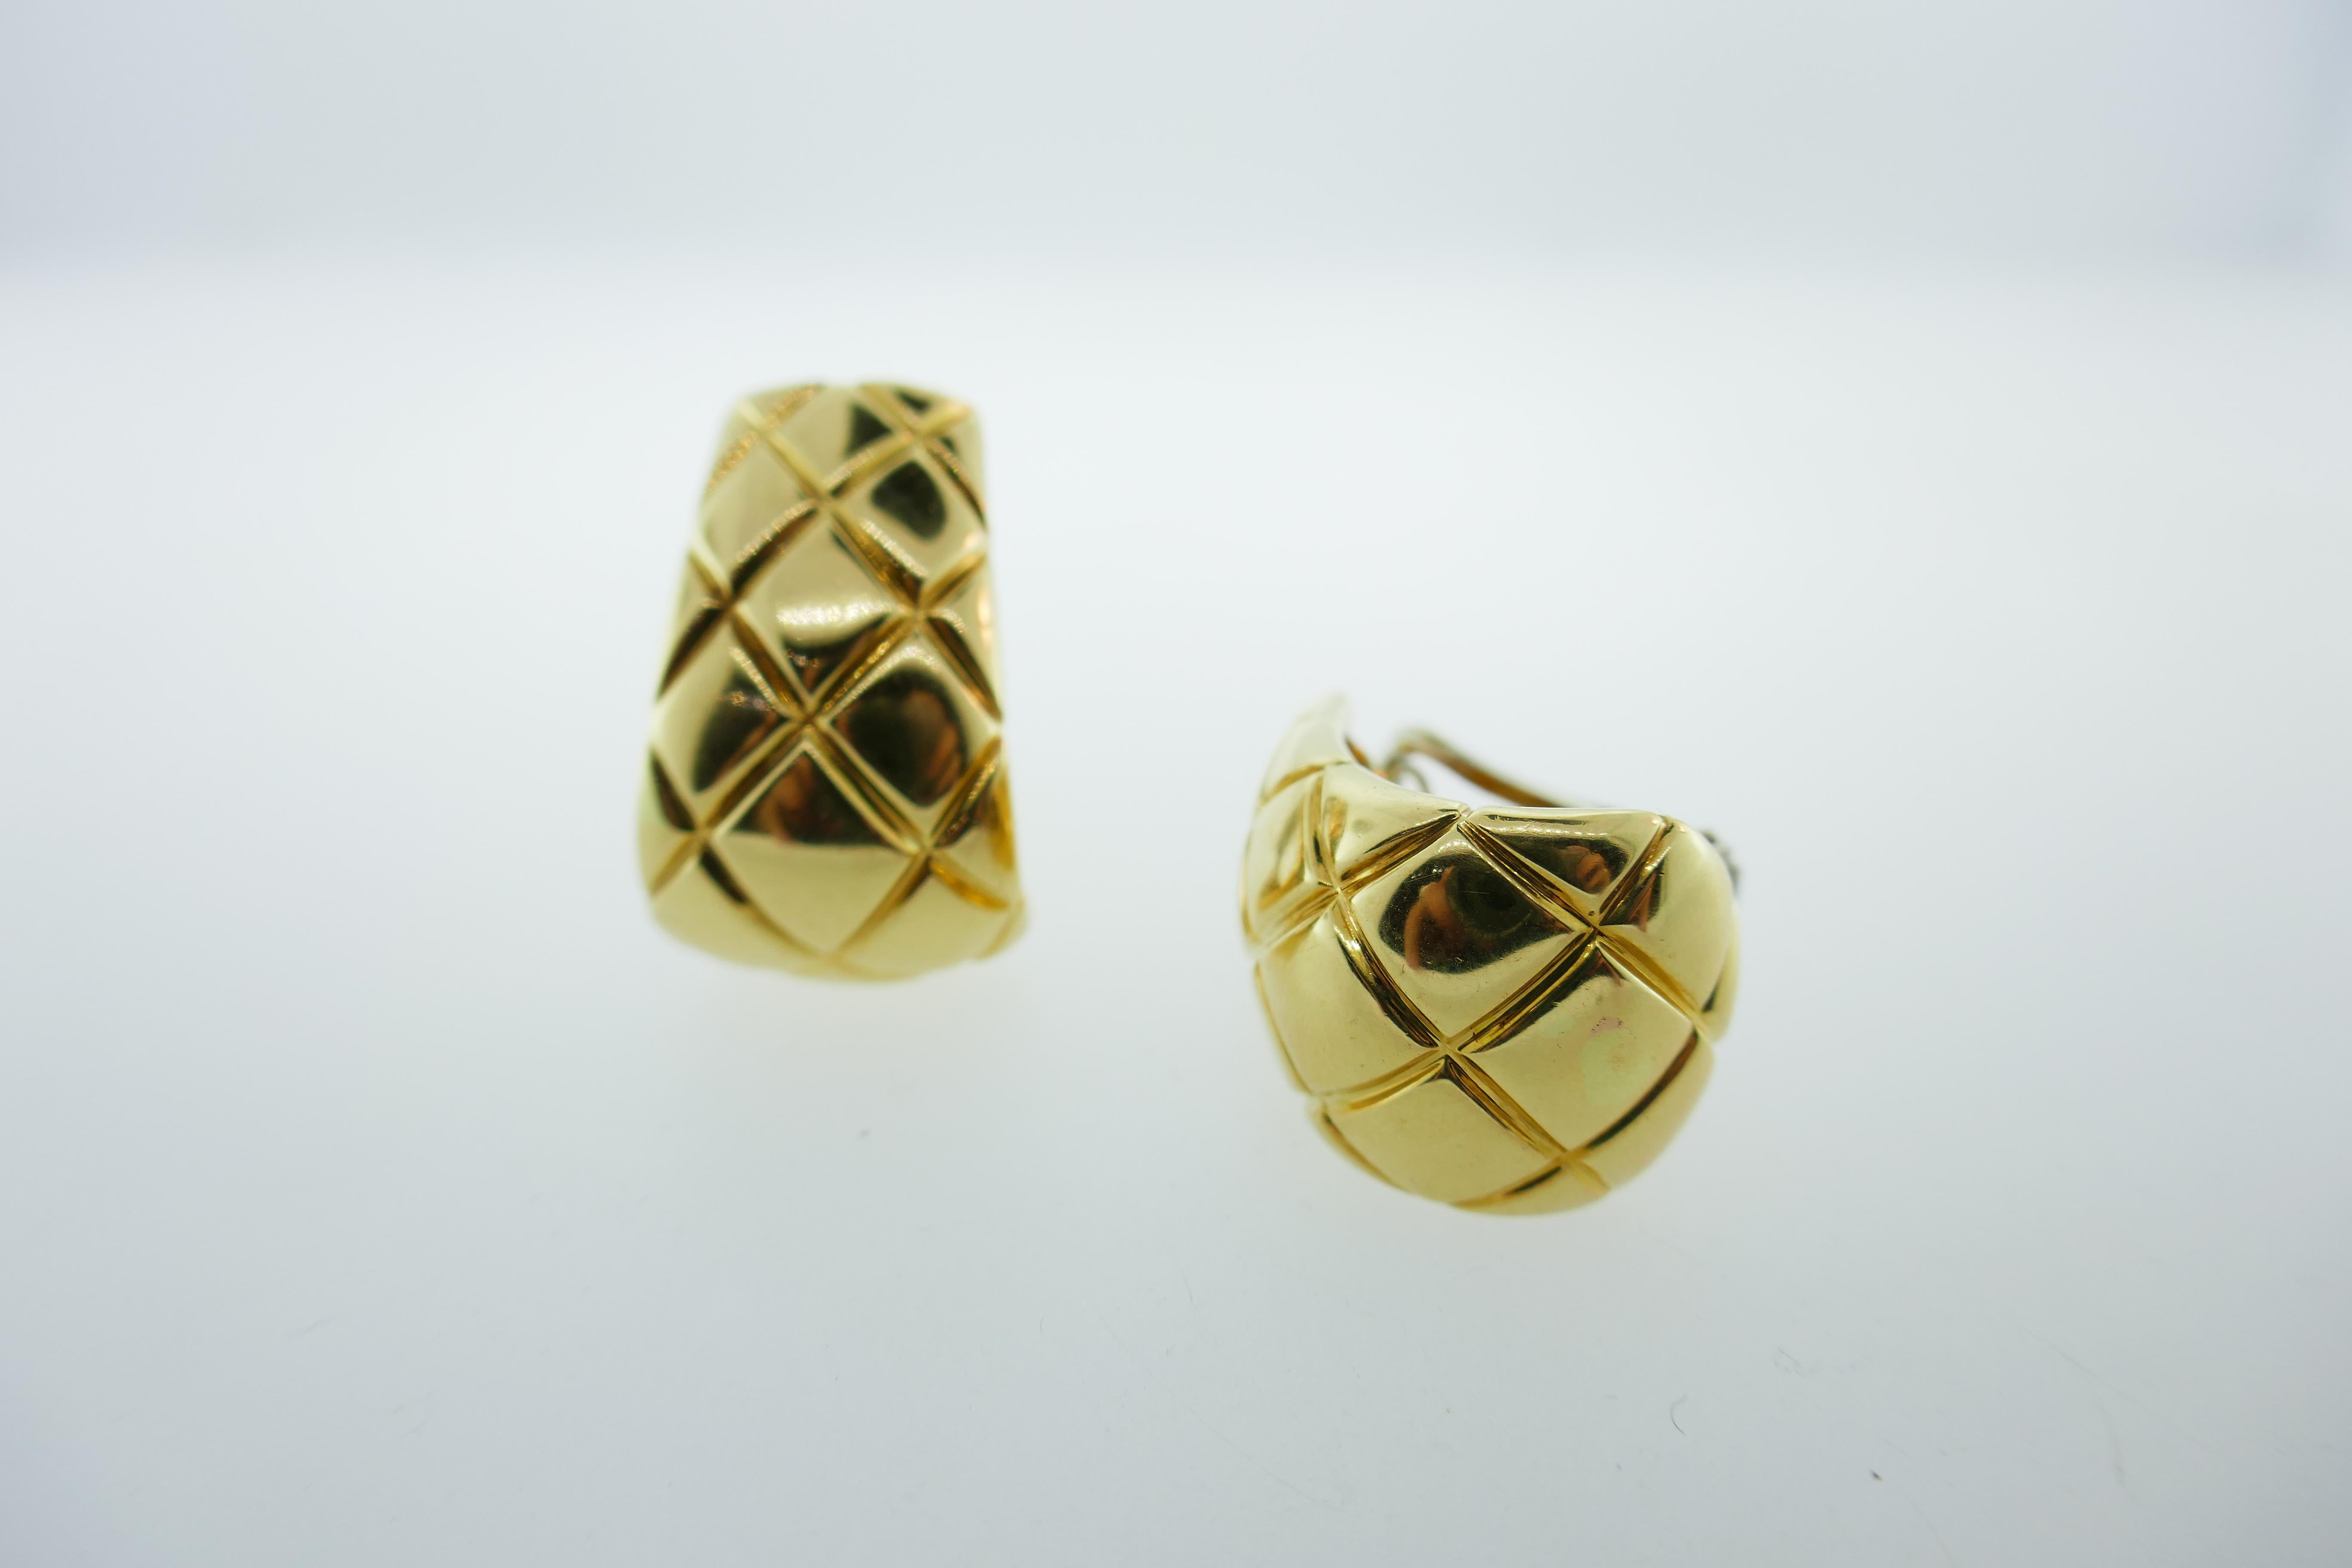 Super groovy pair of quilted 18k yellow gold hoop earrings from the formidable French house; perfect addition to any outfit!

Weight: 24.7 grams 

Dimensions: 5/8